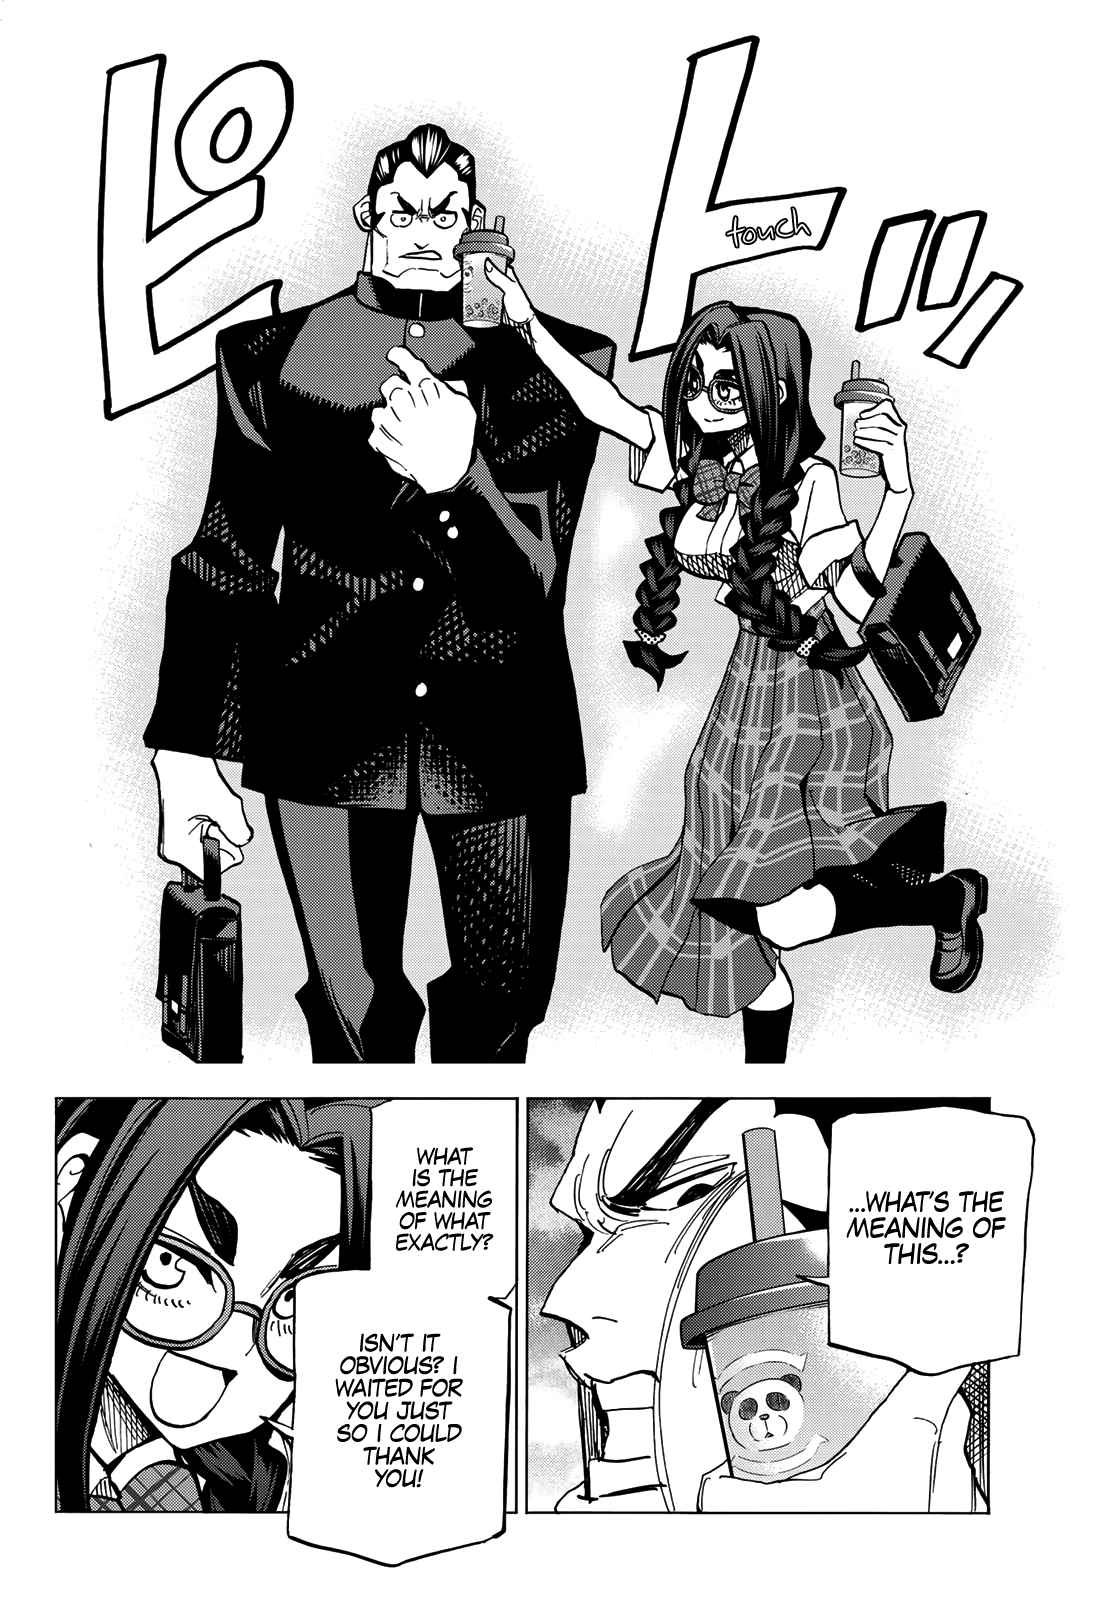 The Story Between a Dumb Prefect and a High School Girl with an Inappropriate Skirt Length Ch. 8 The Story About the Dumb Prefect’s School Student Council